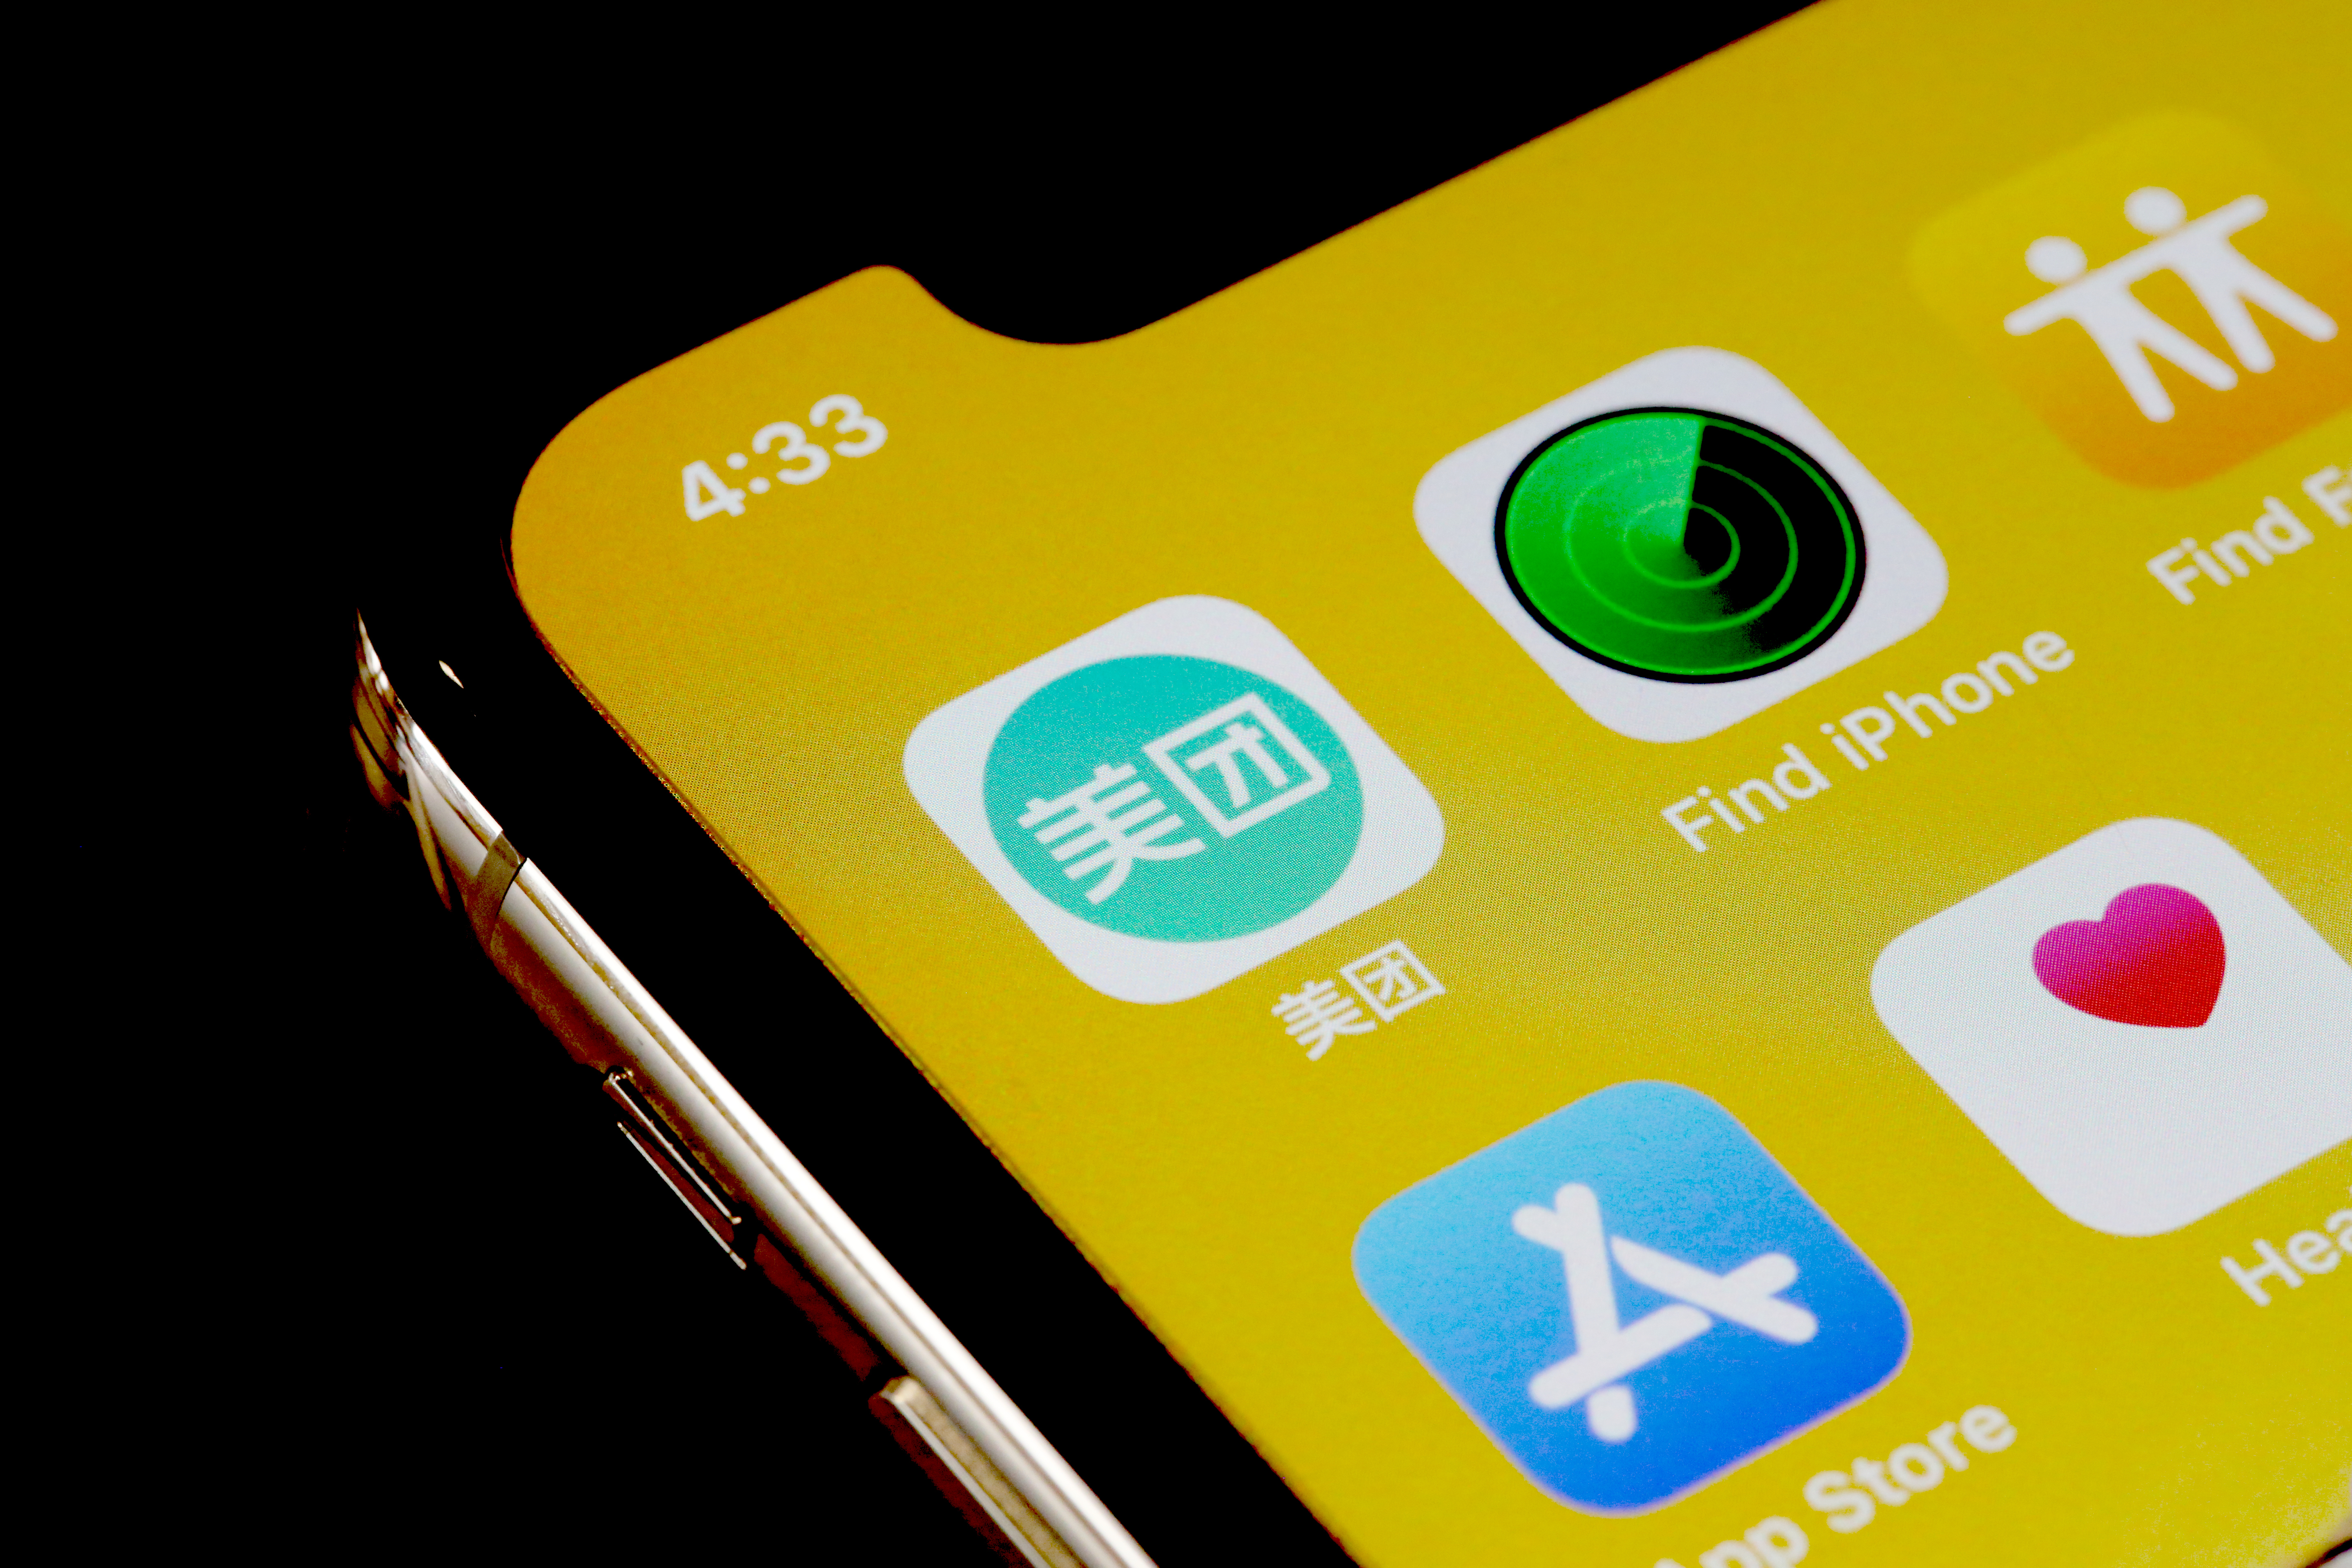 Meituan, Douyu, YY accused by Chinese authorities for misusing users’ information without approval